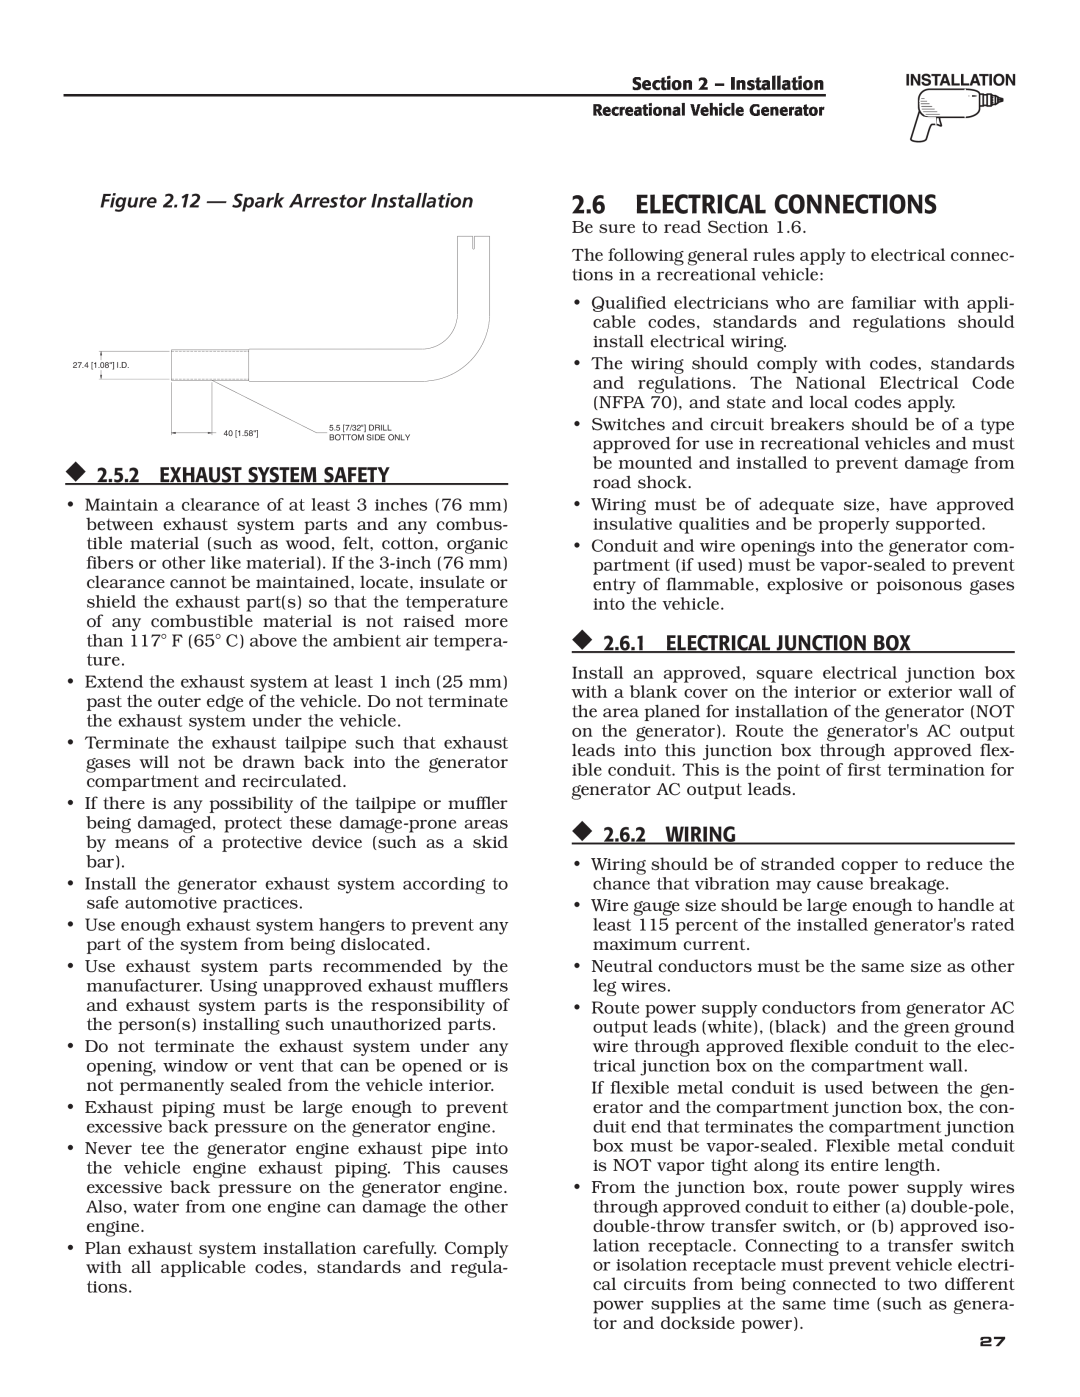 Guardian Technologies 004701-0 2.6Electrical Connections, 2.5.2 EXHAUST SYSTEM SAFETY, 2.6.1 ELECTRICAL JUNCTION BOX 